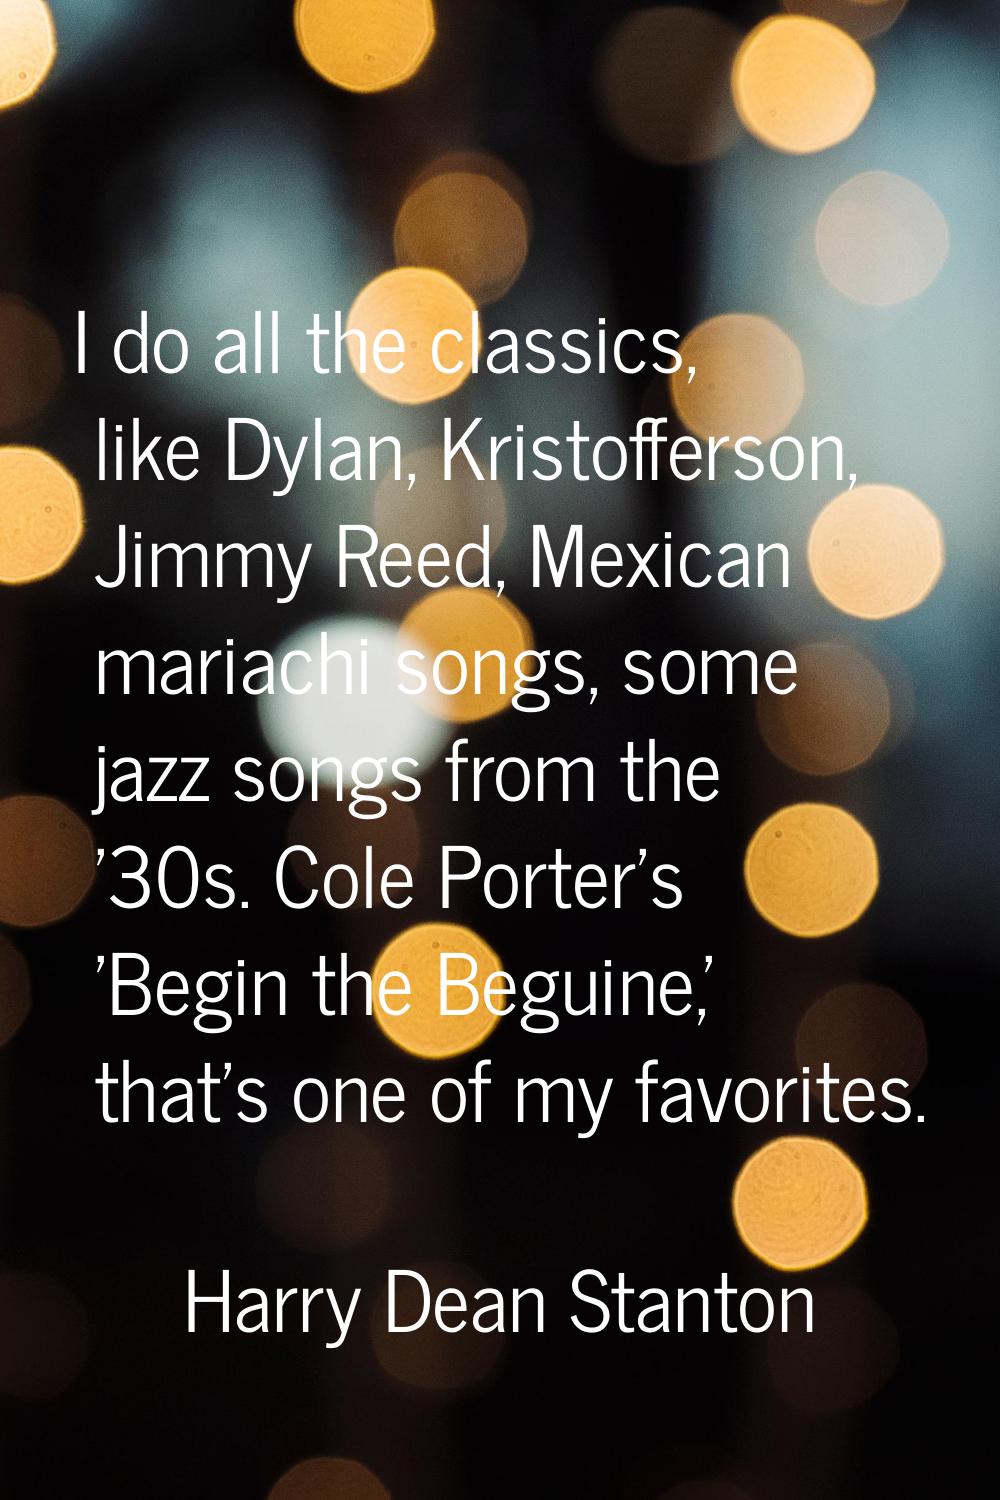 I do all the classics, like Dylan, Kristofferson, Jimmy Reed, Mexican mariachi songs, some jazz son